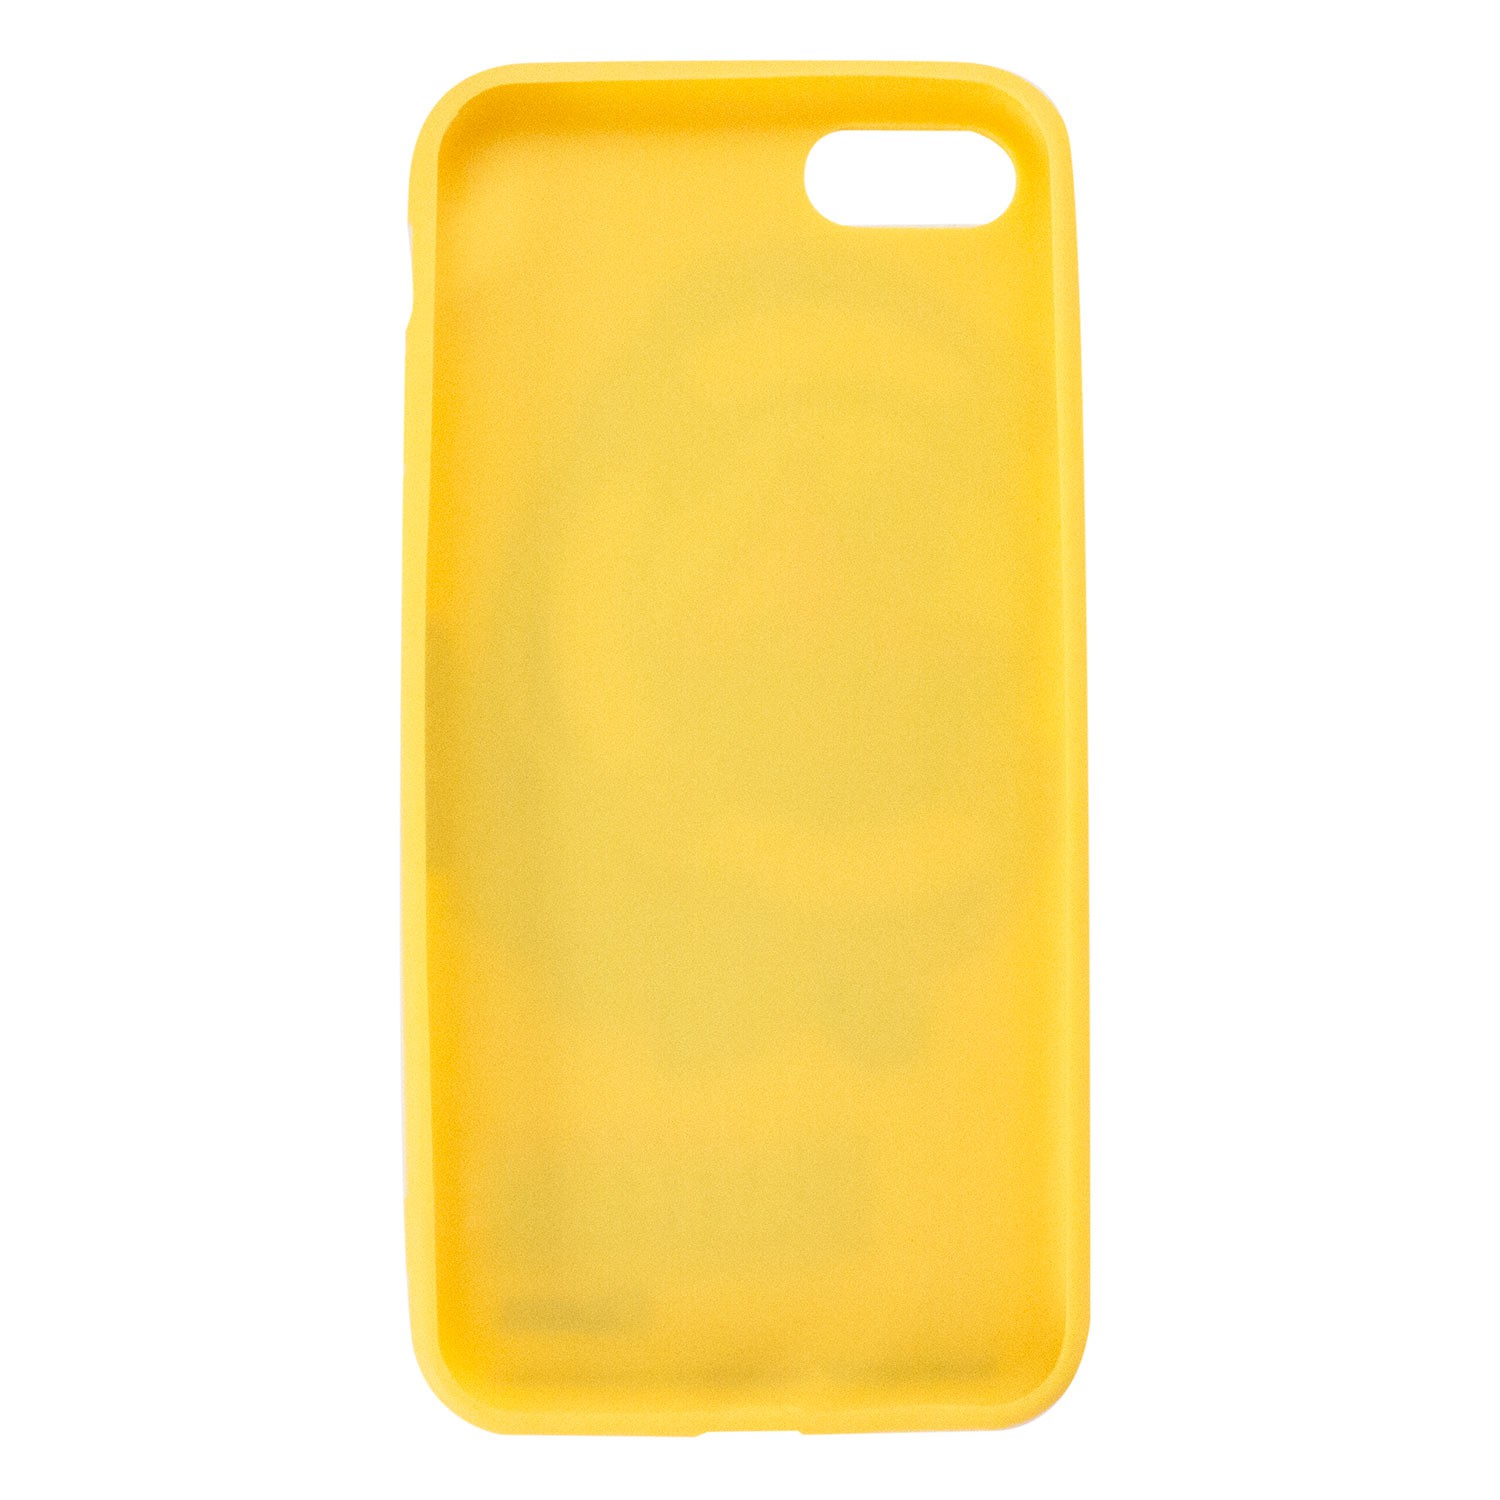 Pacifico iPhone 7 Rubberized Case